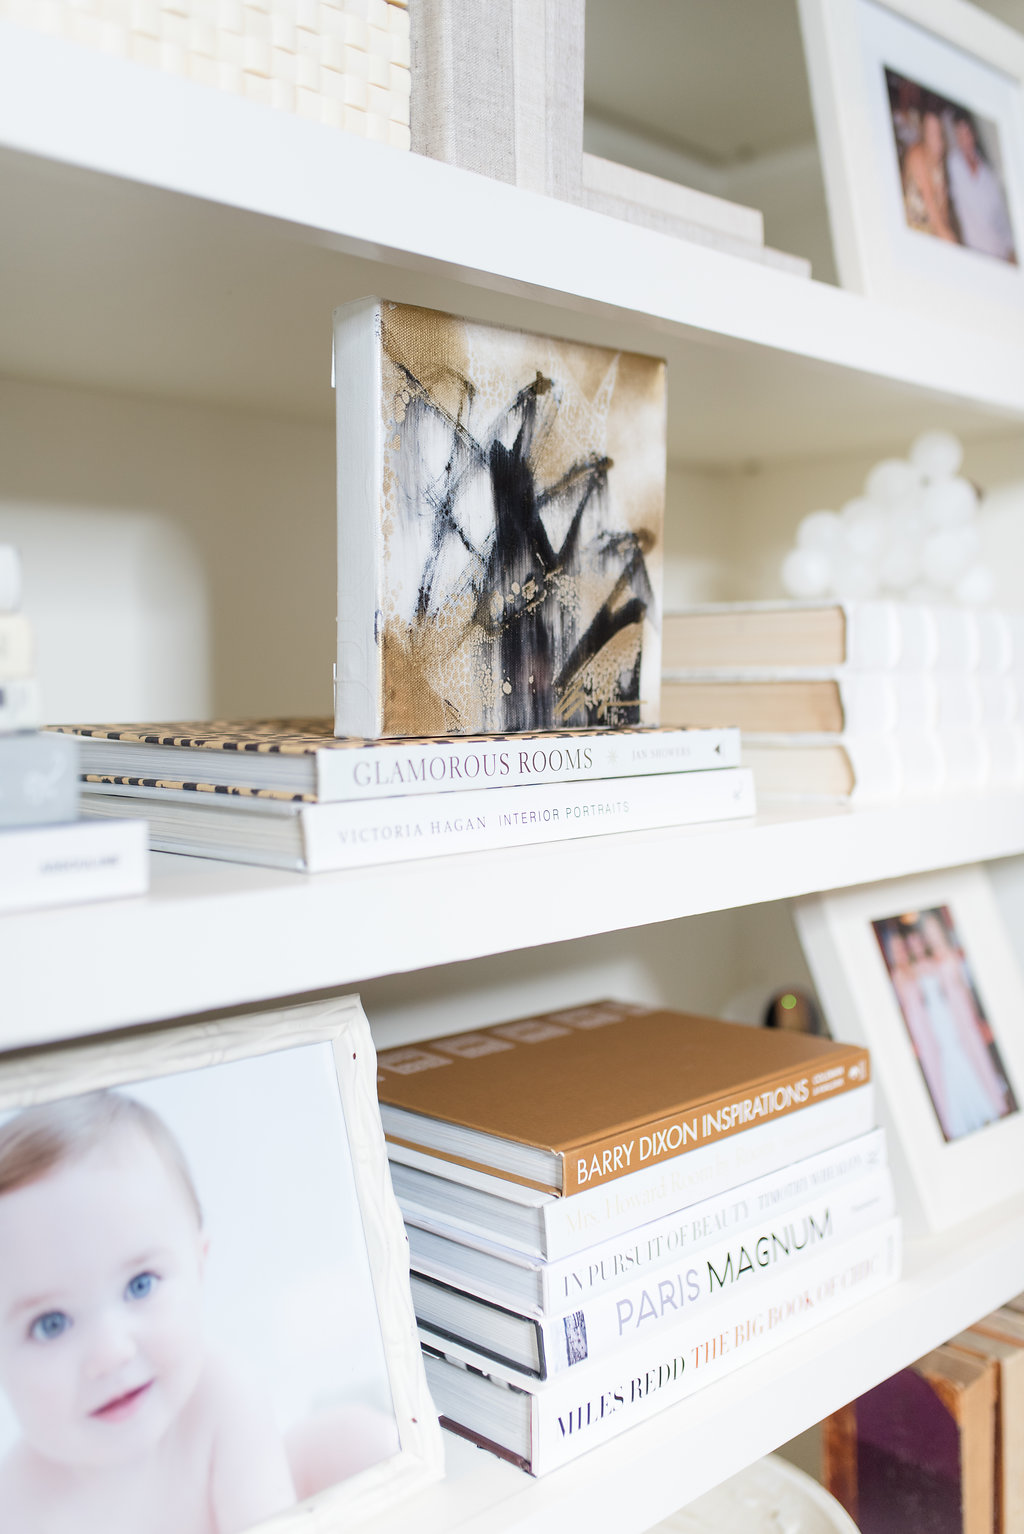 How To Style Bookshelves